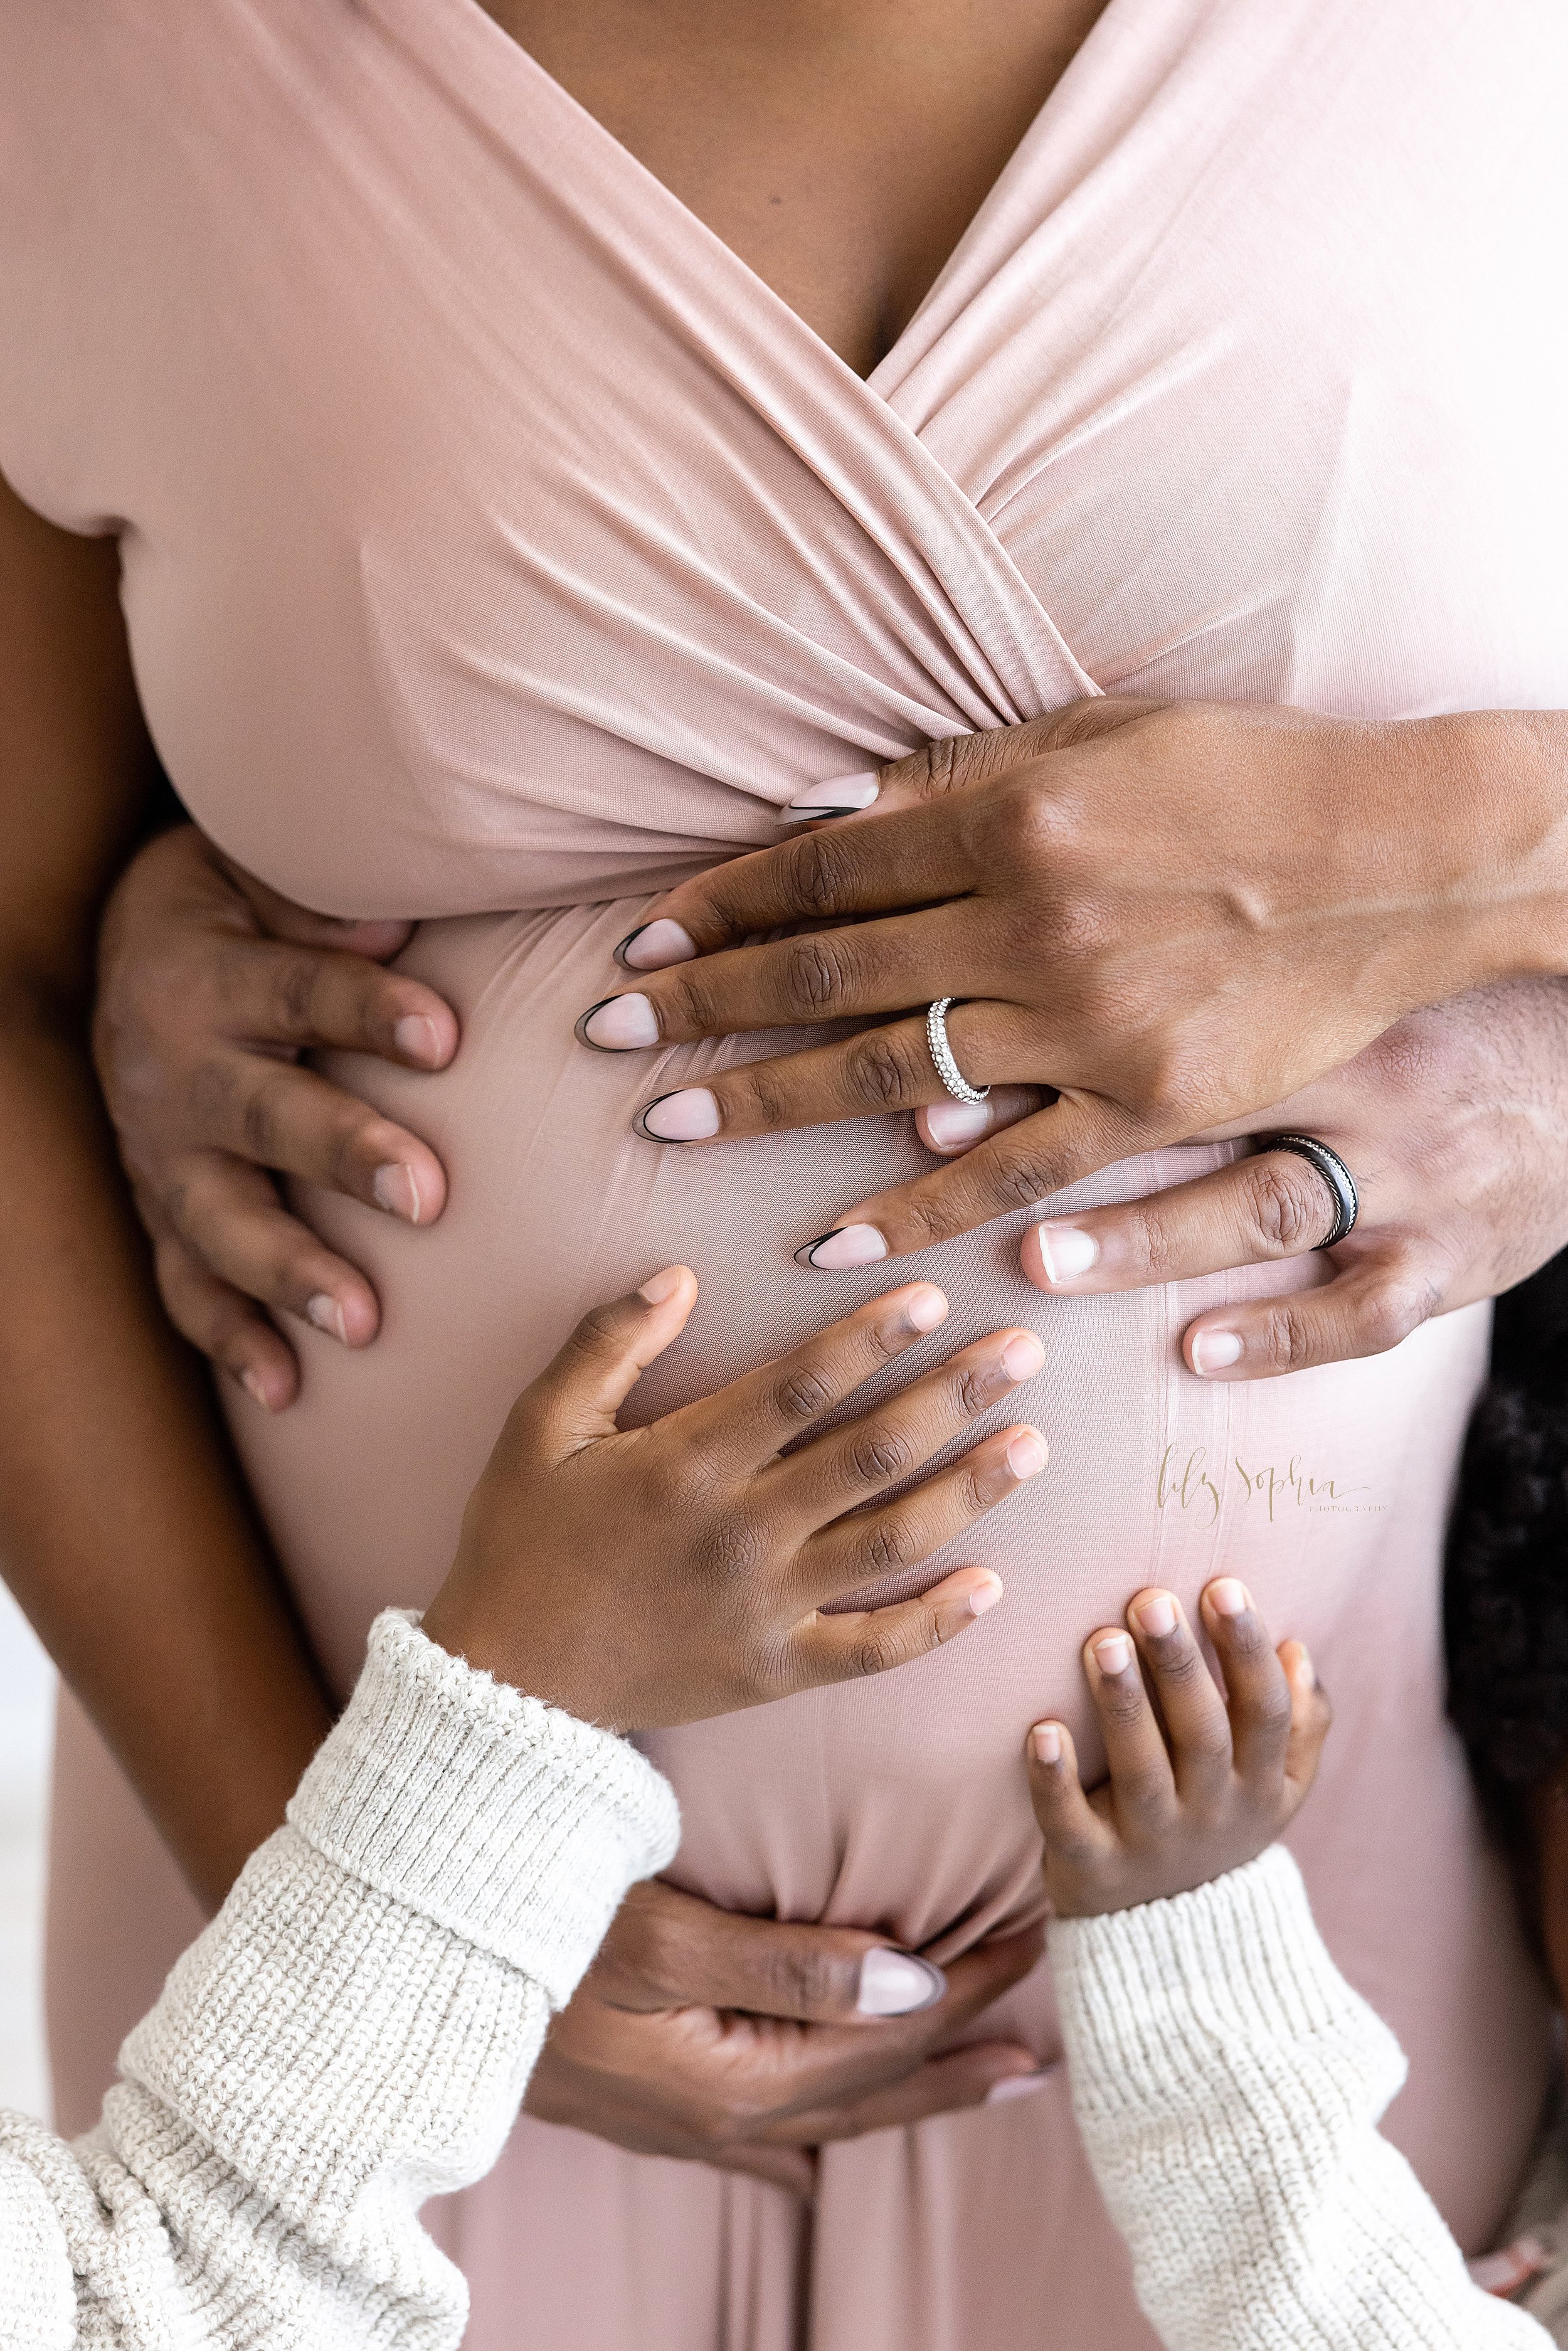  Maternity family portrait of an African-American mother’s belly with the hands of the family touching the child in utero taken in a studio near Old Fourth Ward in Atlanta that uses natural lighting. 